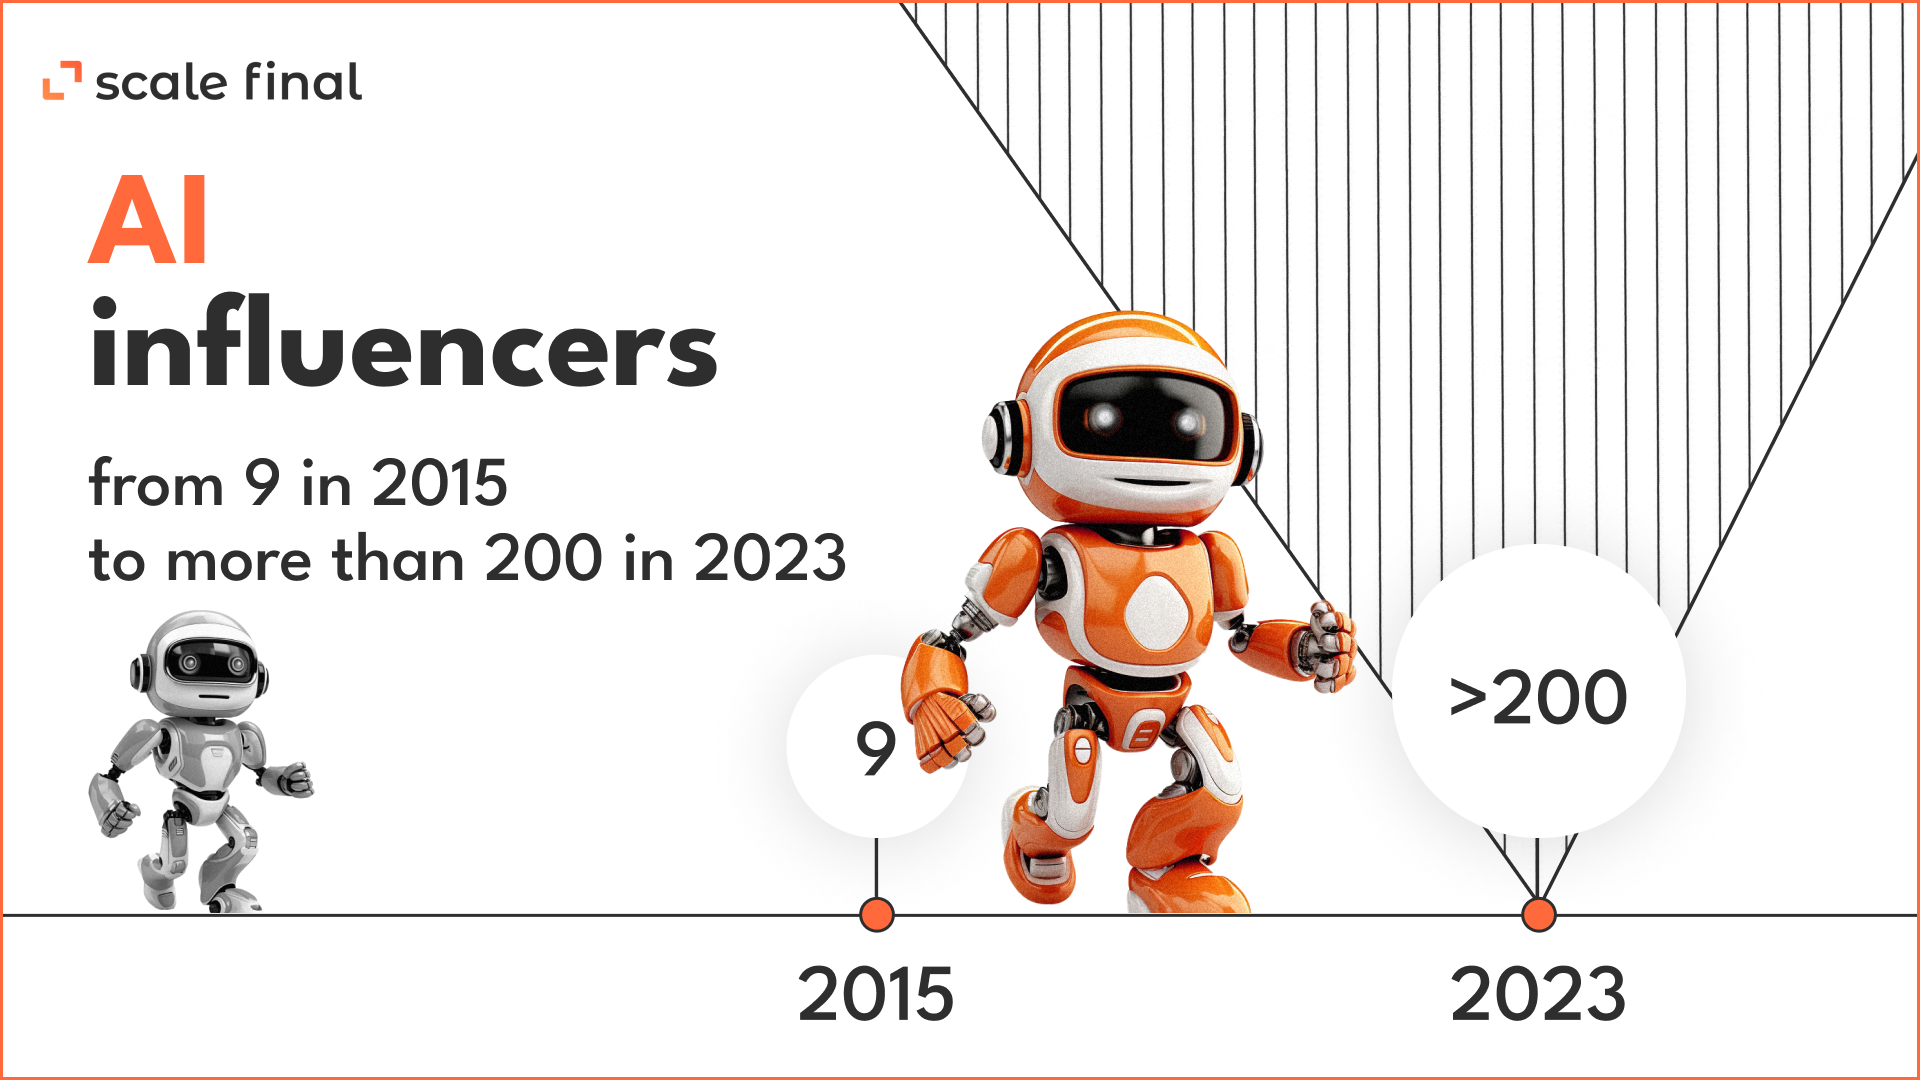 AI influencers from 9 in 2015to more than 200 in 2023